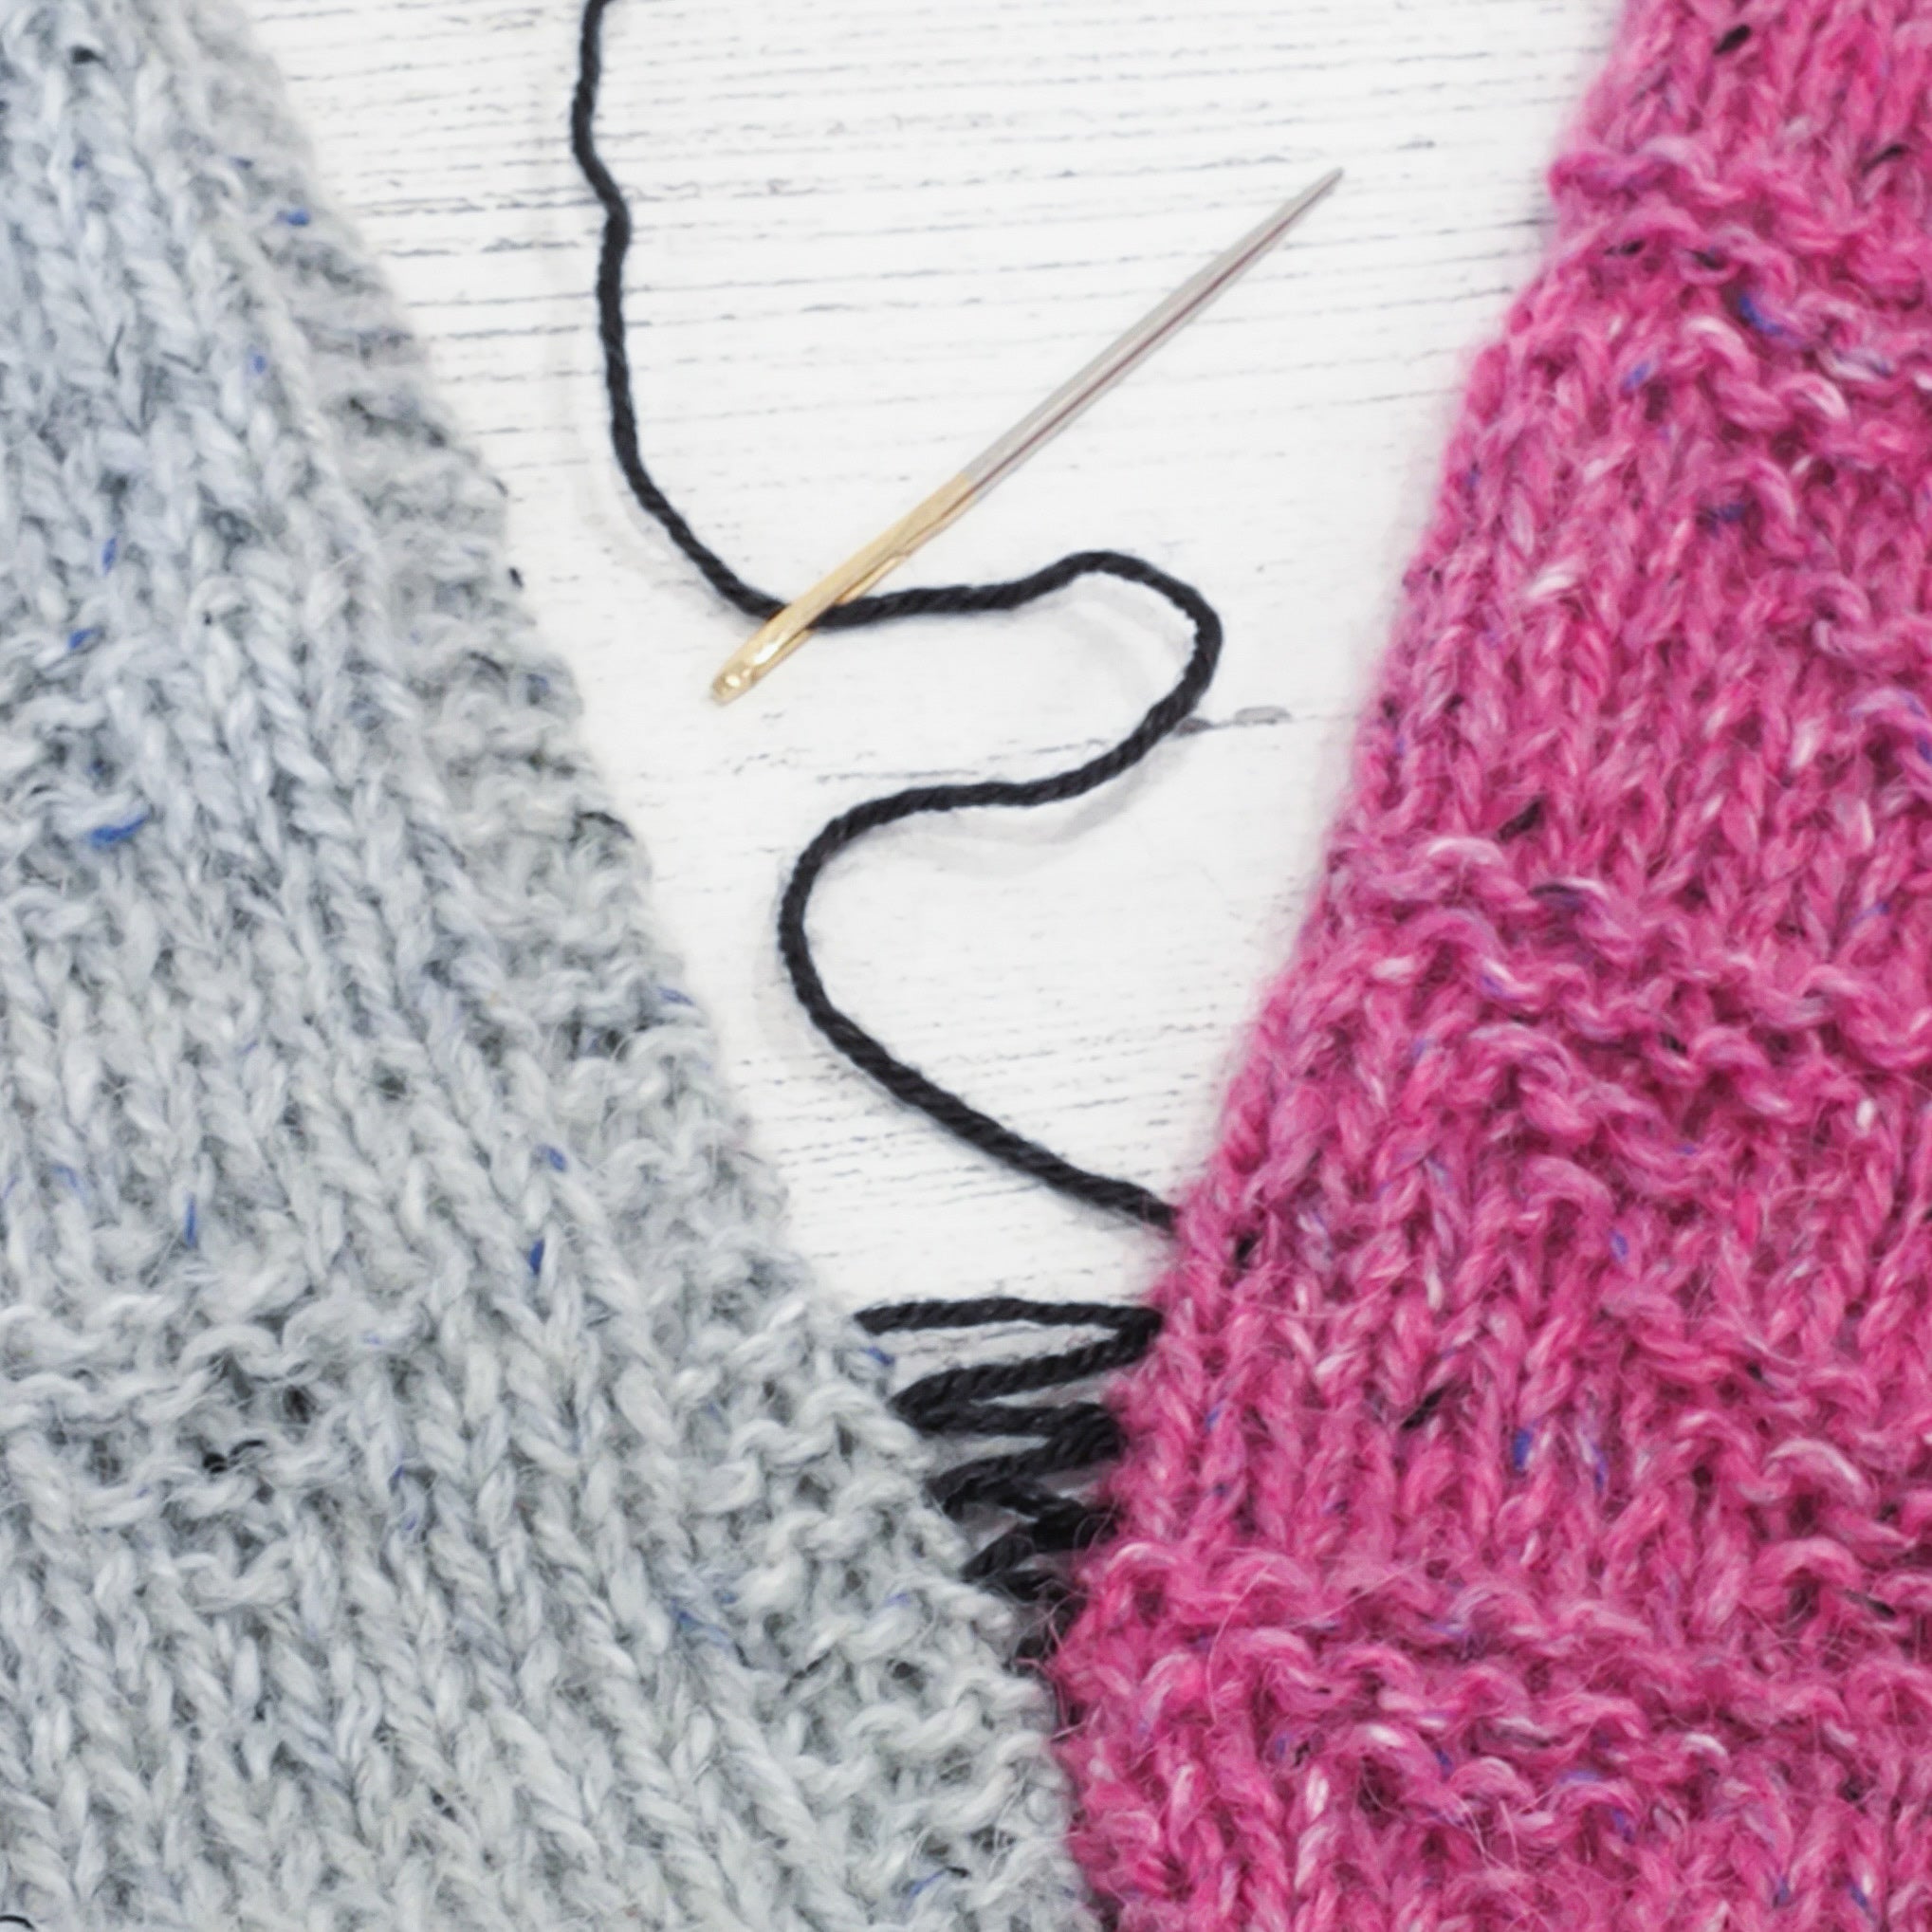 Online Class  - Finishing techniques for knitting